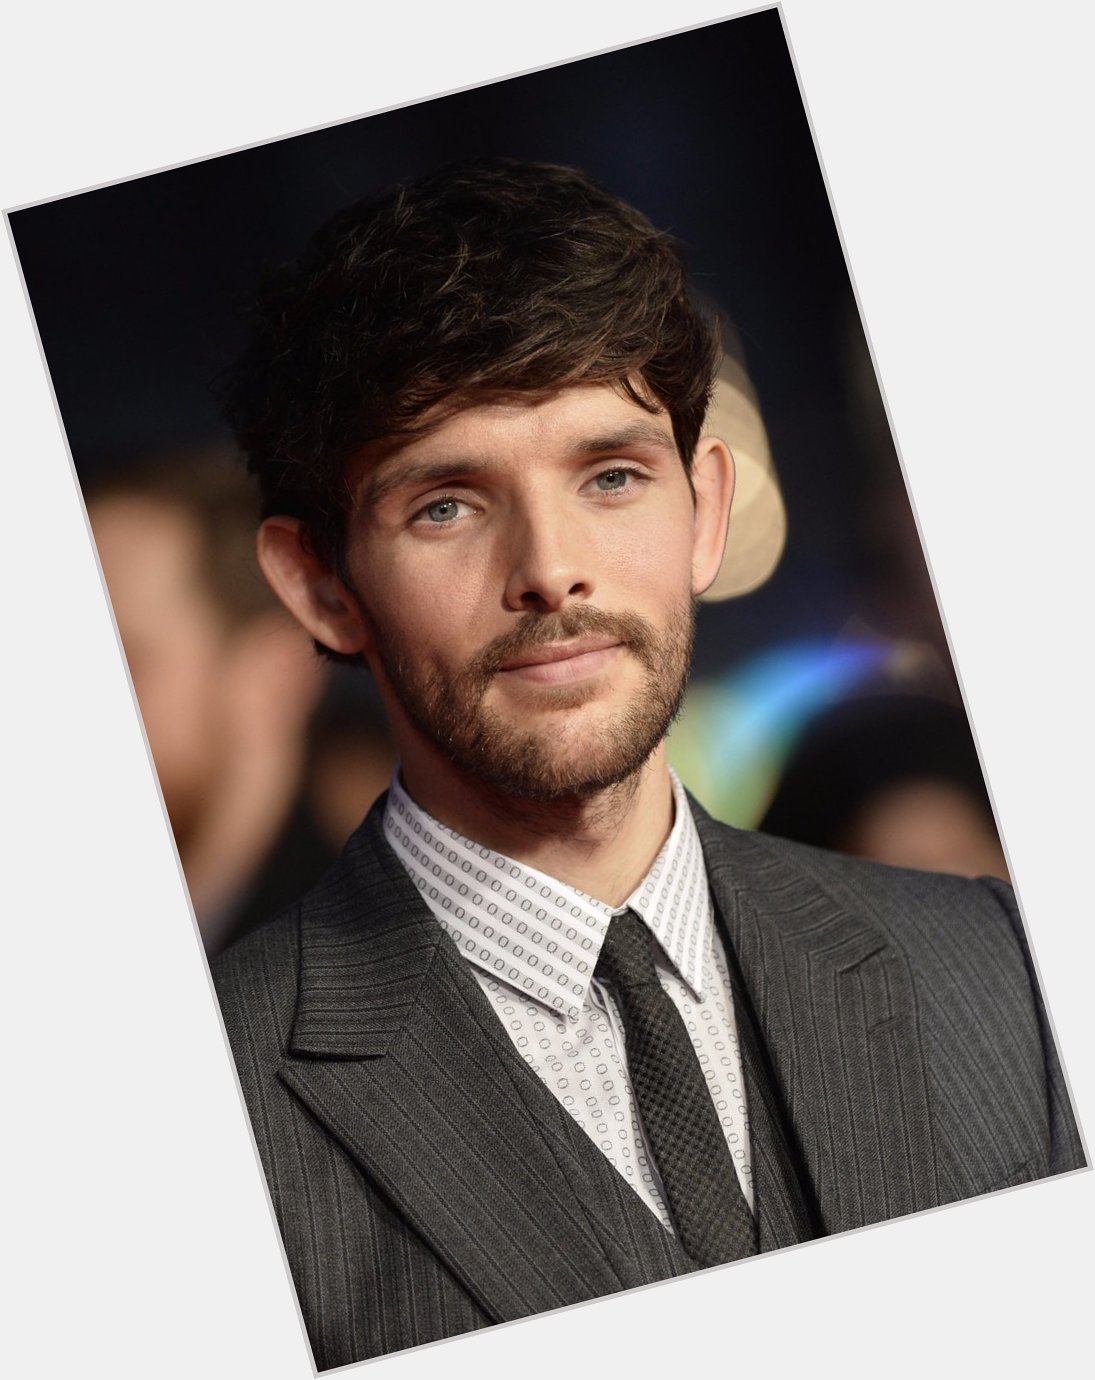 A very happy birthday to the talented and handsome Colin Morgan!  (1/1/86)  